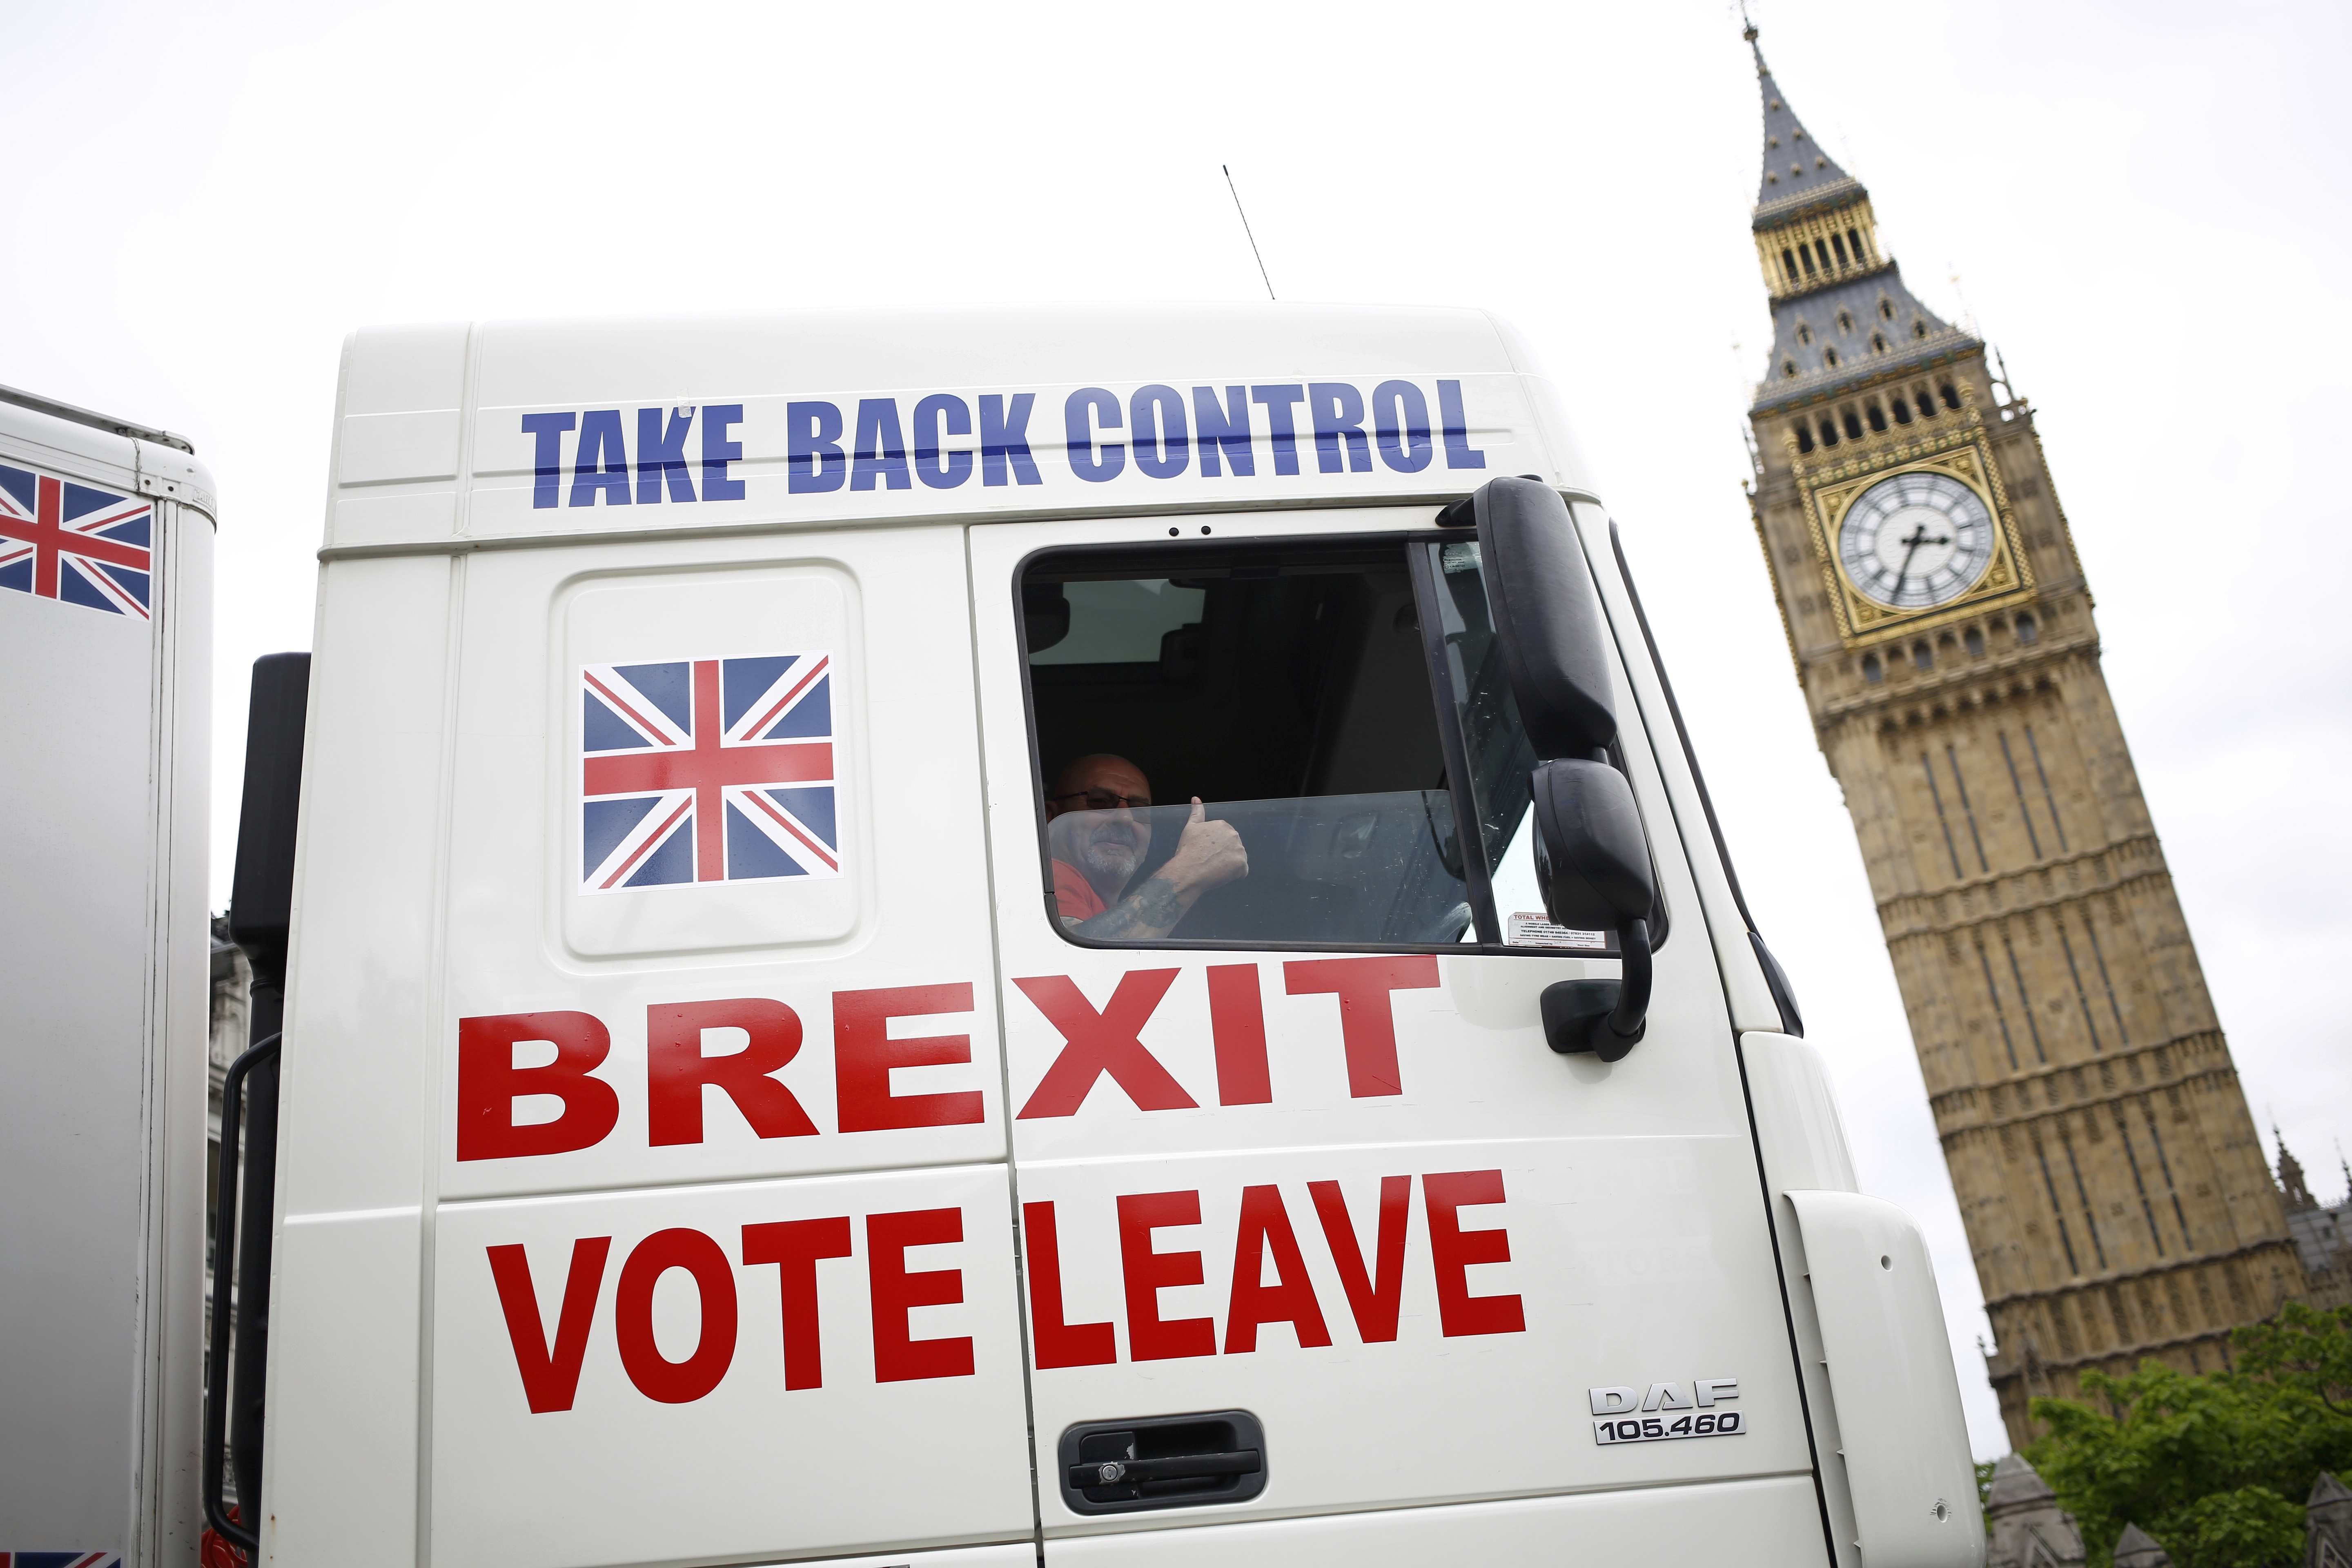 A truck driven by a Leave supporter promotes Brexit in Parliament Square, London, in June 2016. Photo: Reuters